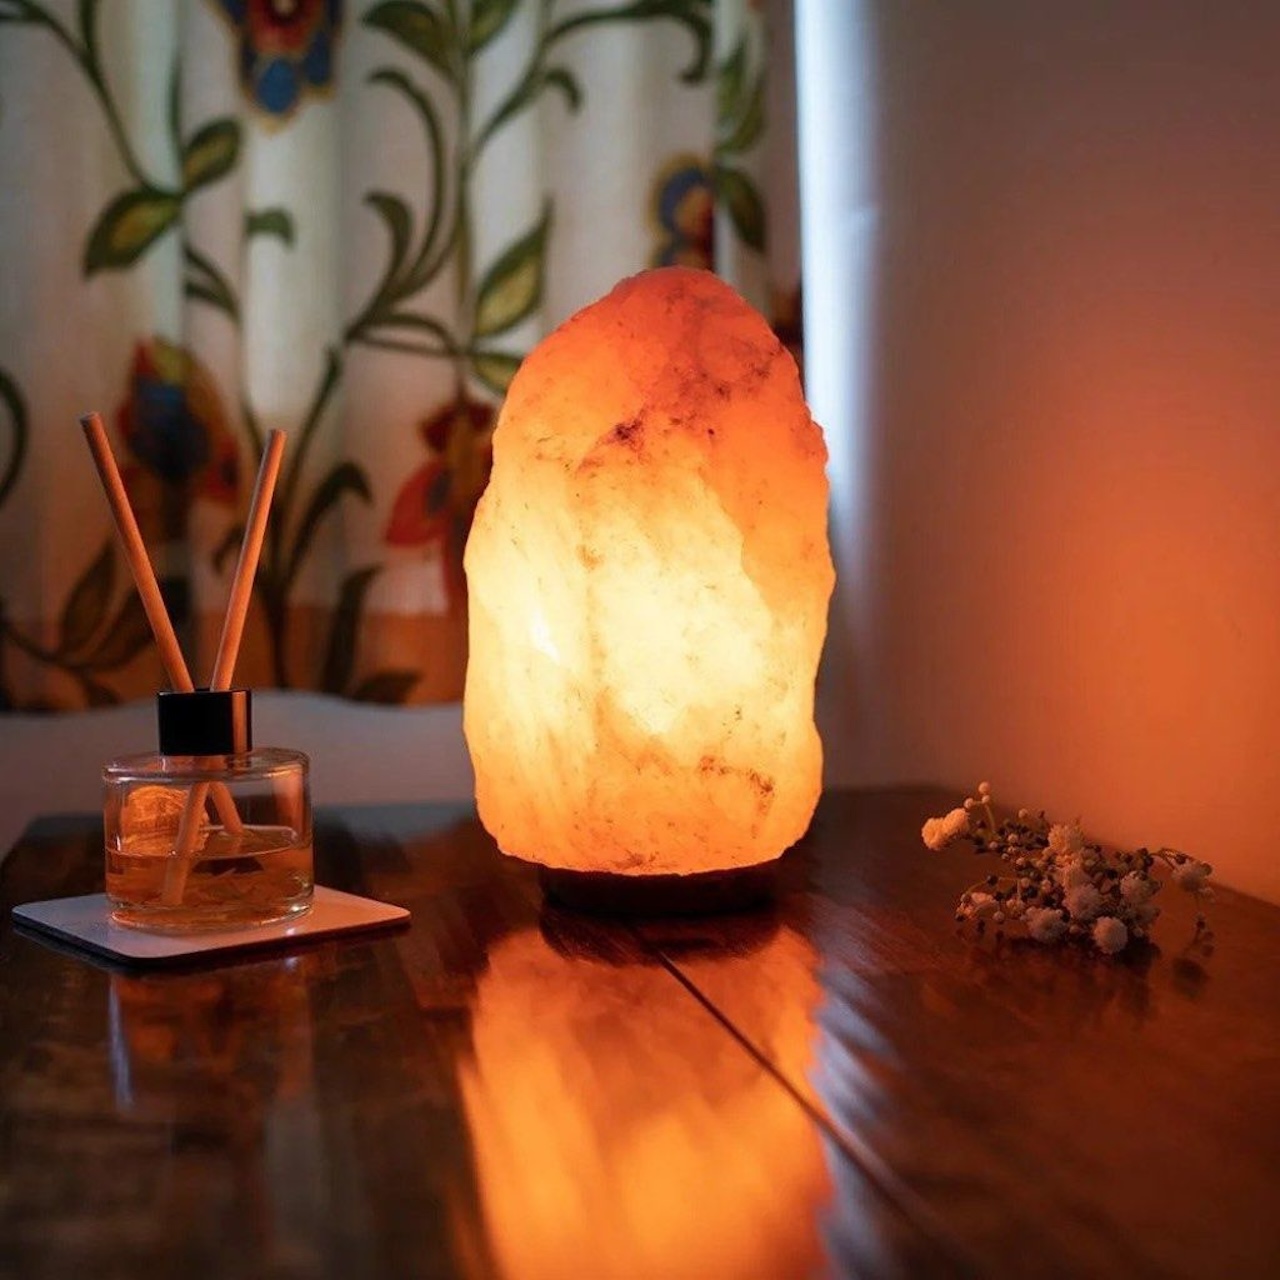 How Long Can You Leave A Salt Lamp On?